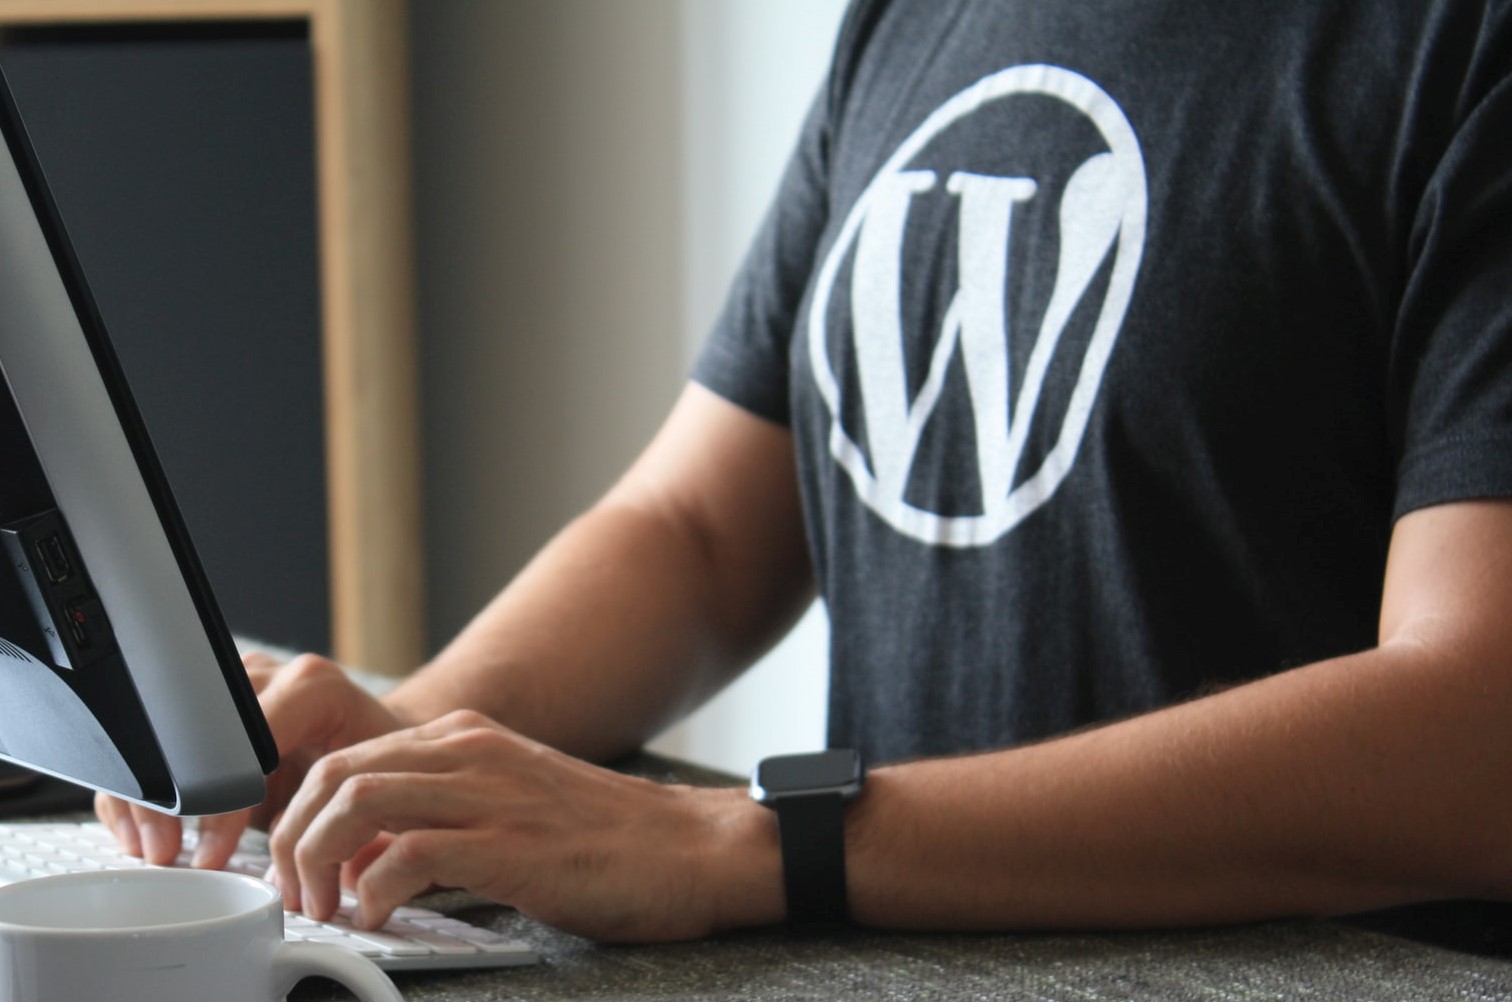 Umbraco vs Wordpress, which CMS should you choose?